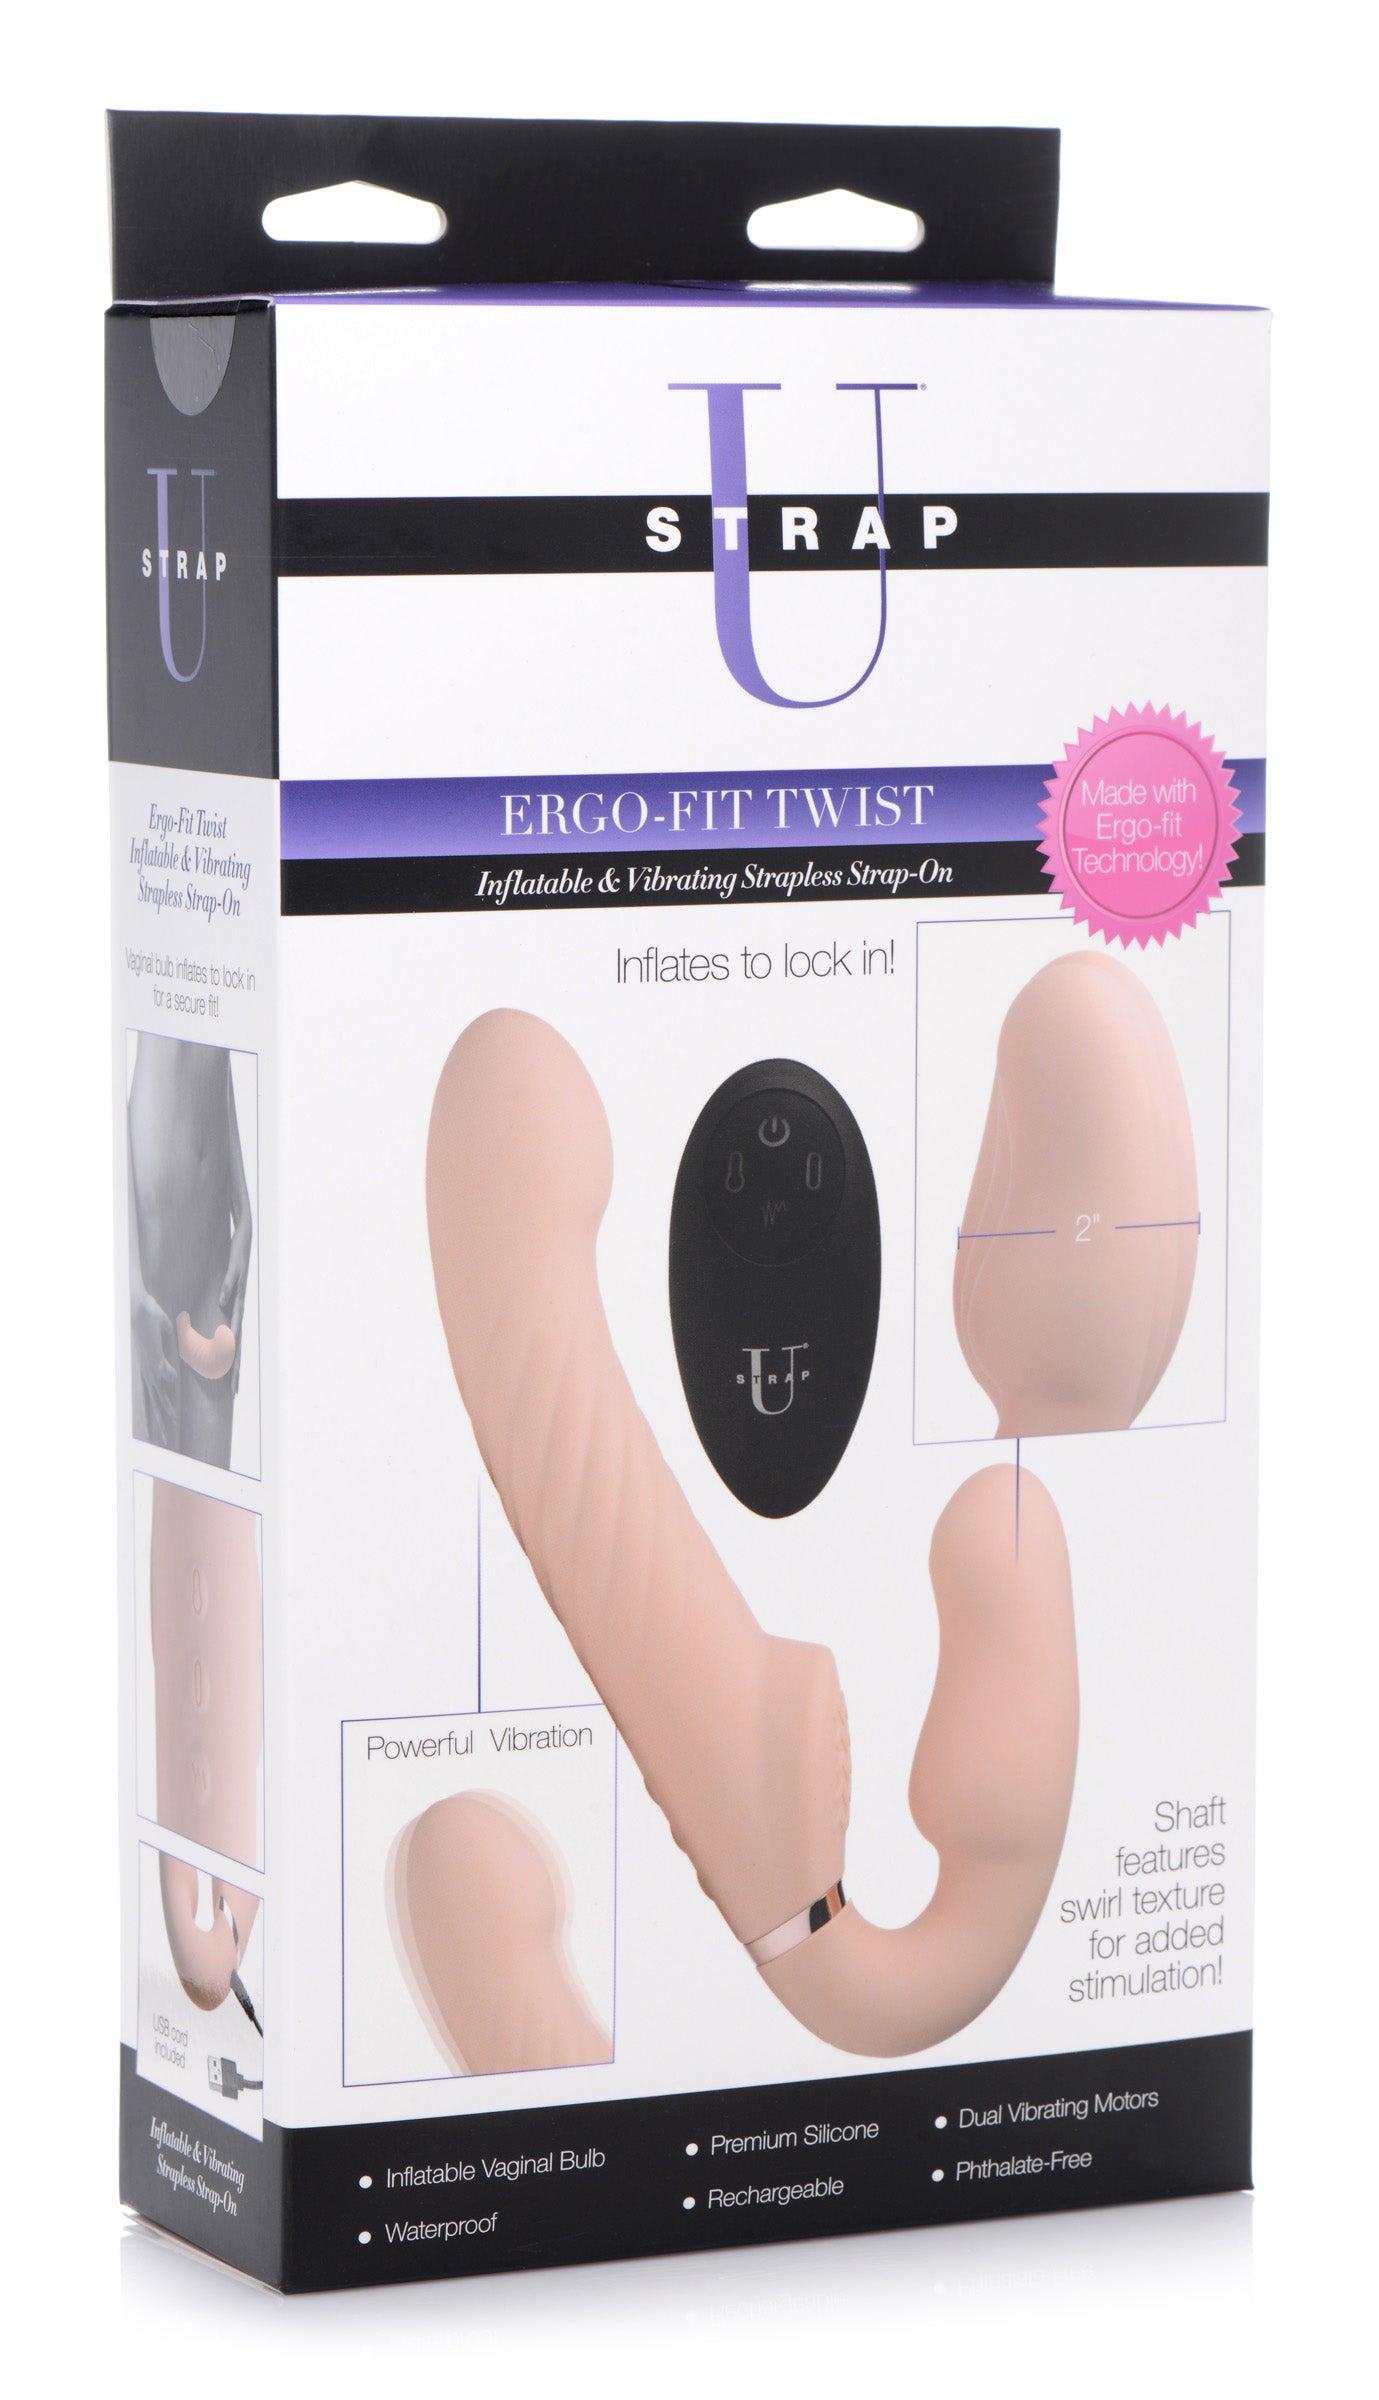 Ergo-Fit Twist Inflatable Vibrating Silicone Strapless Strap-on - Beige - UABDSM